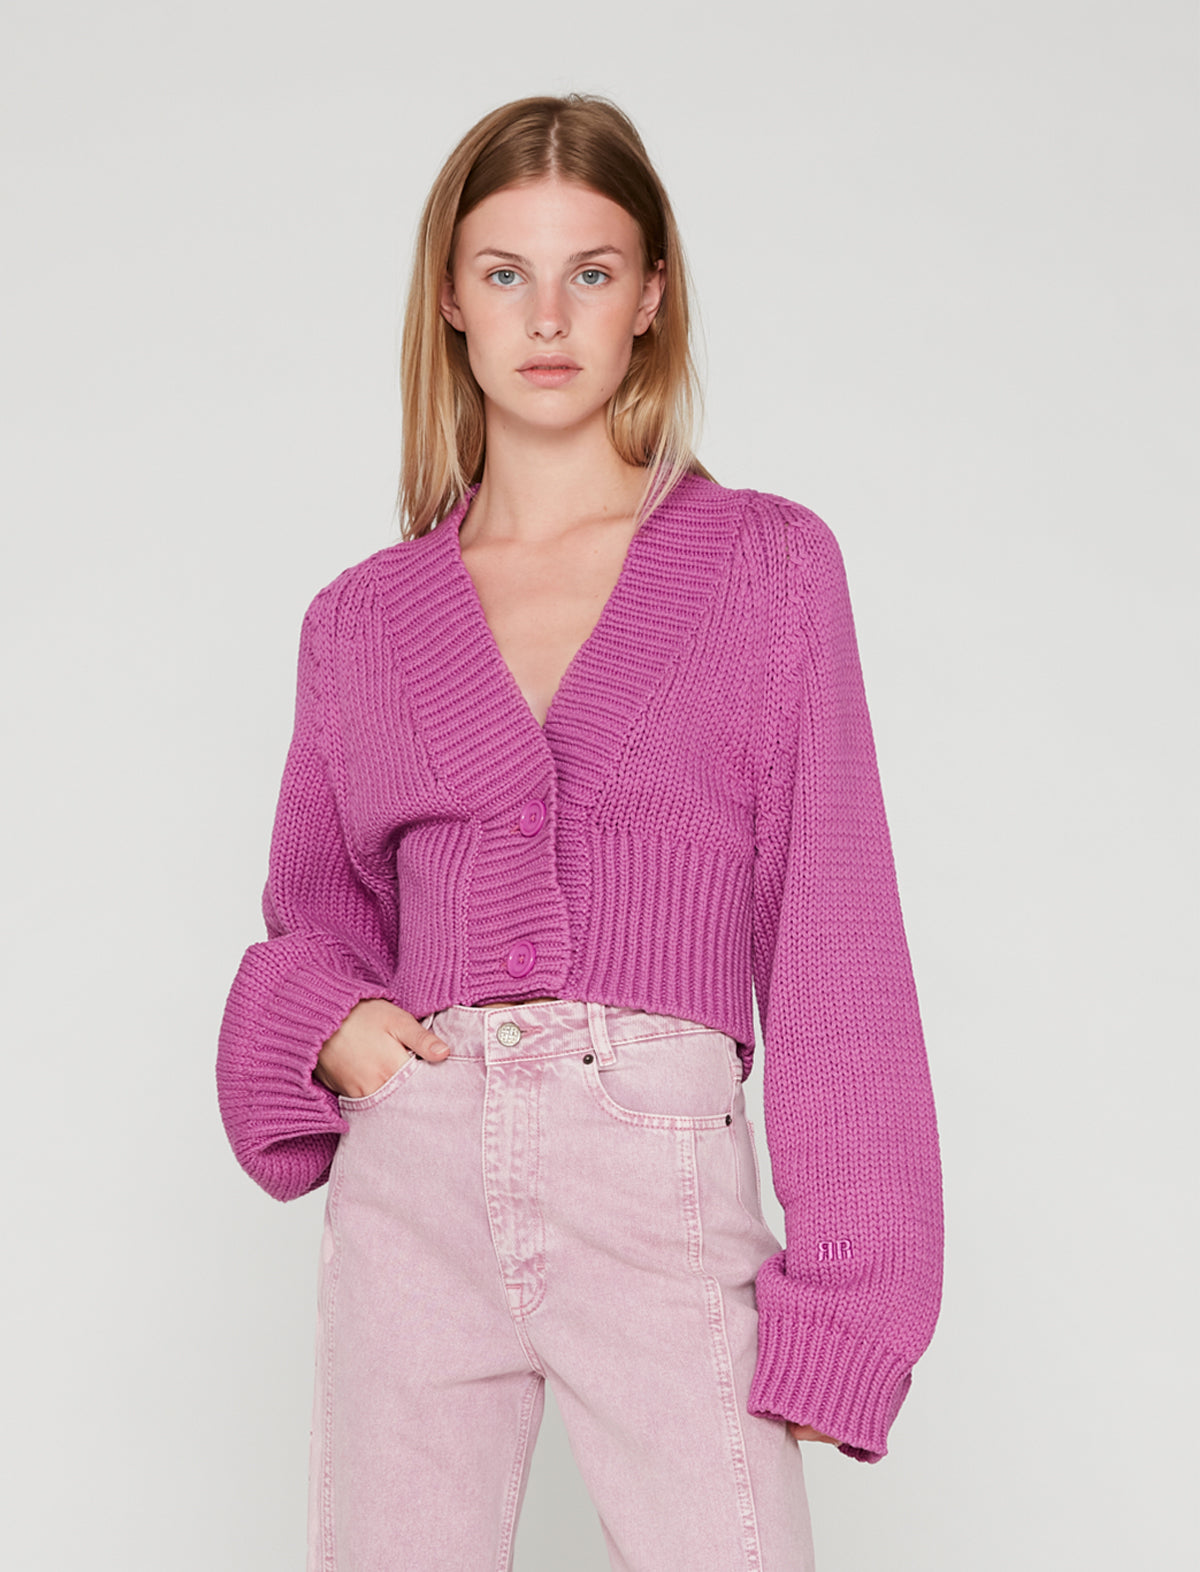 ROTATE Birger Christensen Gracelyn Knit Cardigan in Meadow Mauve